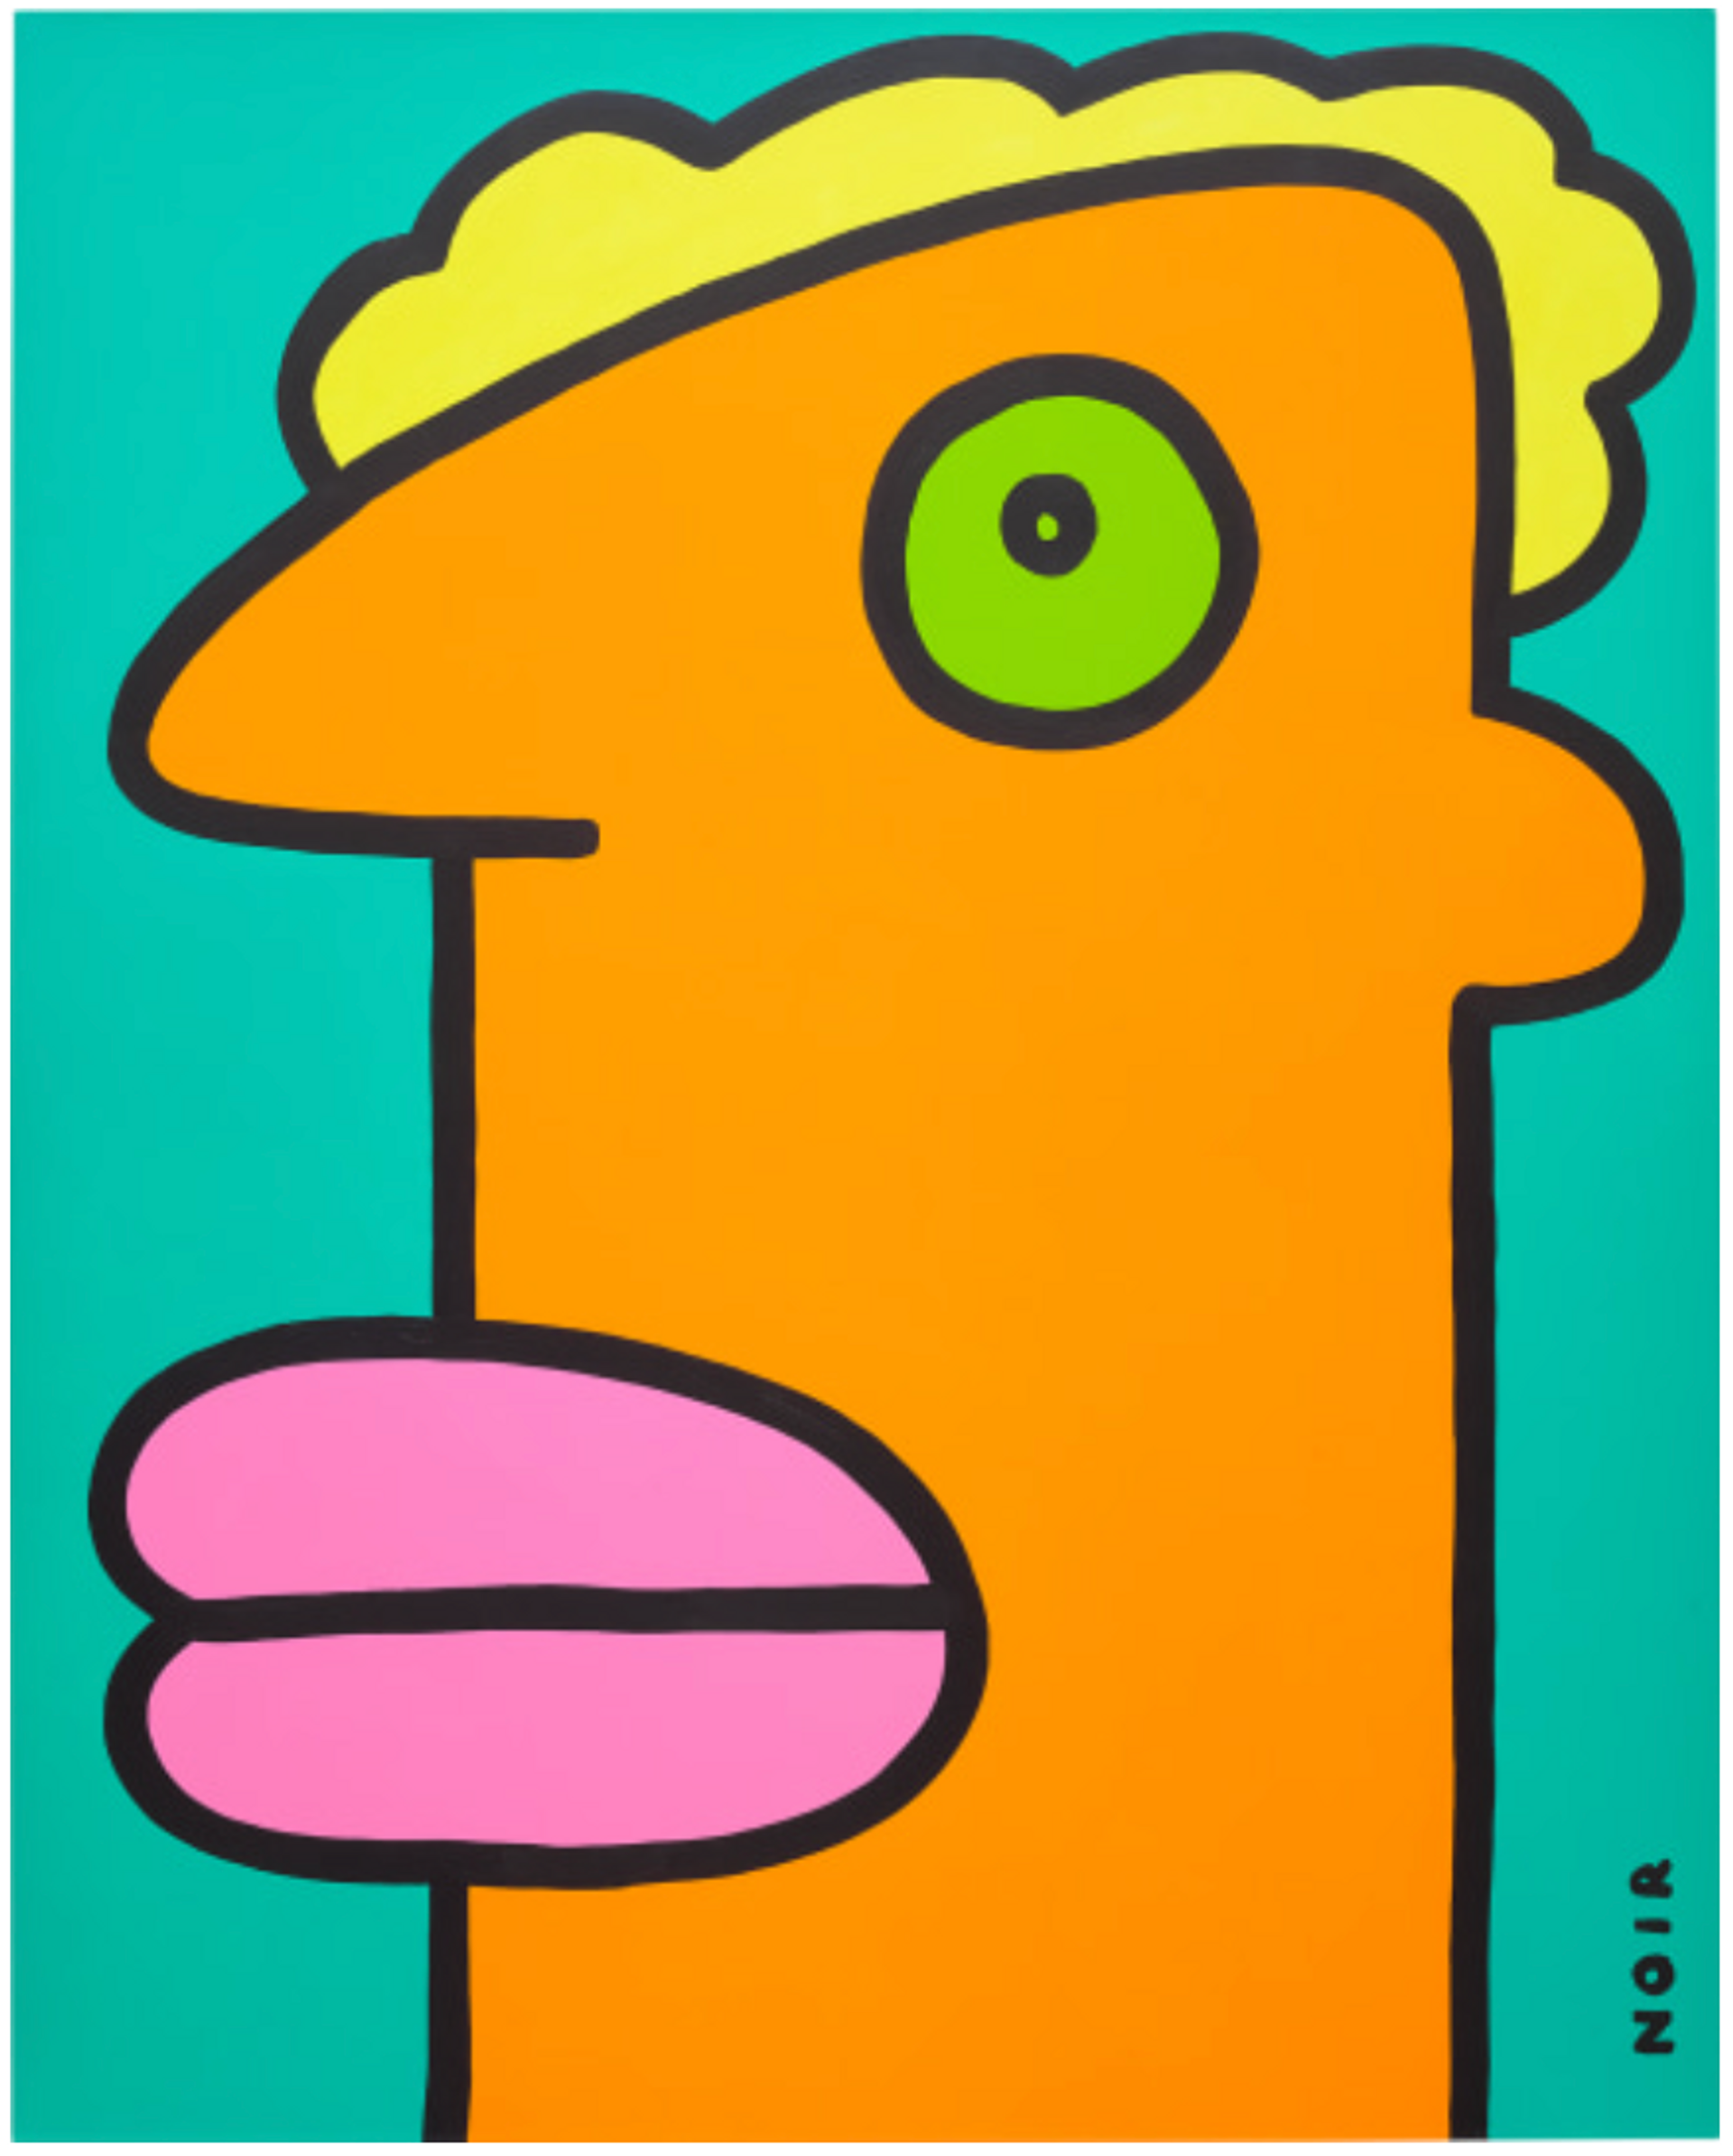 A vibrant painting with bold colors, including shades of orange, turquoise, yellow, pink, and green. The painting depicts a side profile face in a cartooned caricature style, accentuated by thick black lines.